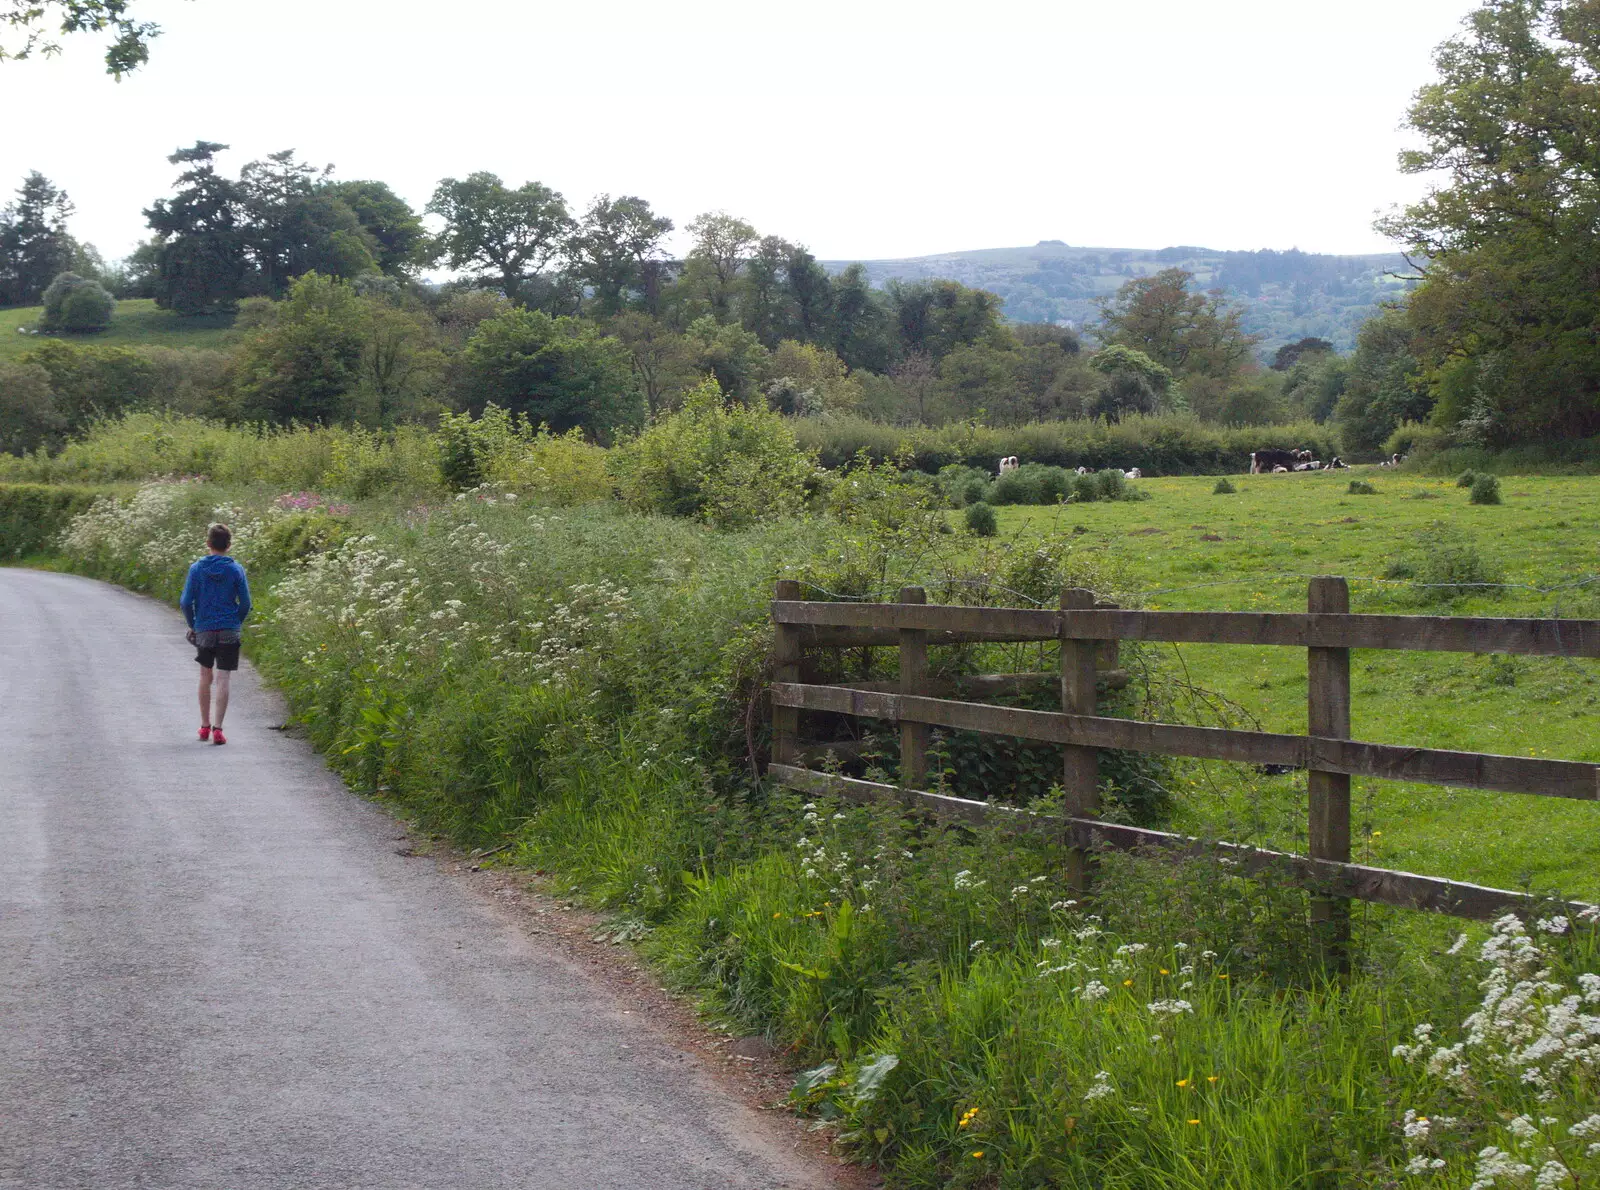 Someone's walking to Chagford, from Chagford Lido and a Trip to Parke, Bovey Tracey, Devon - 25th May 2019